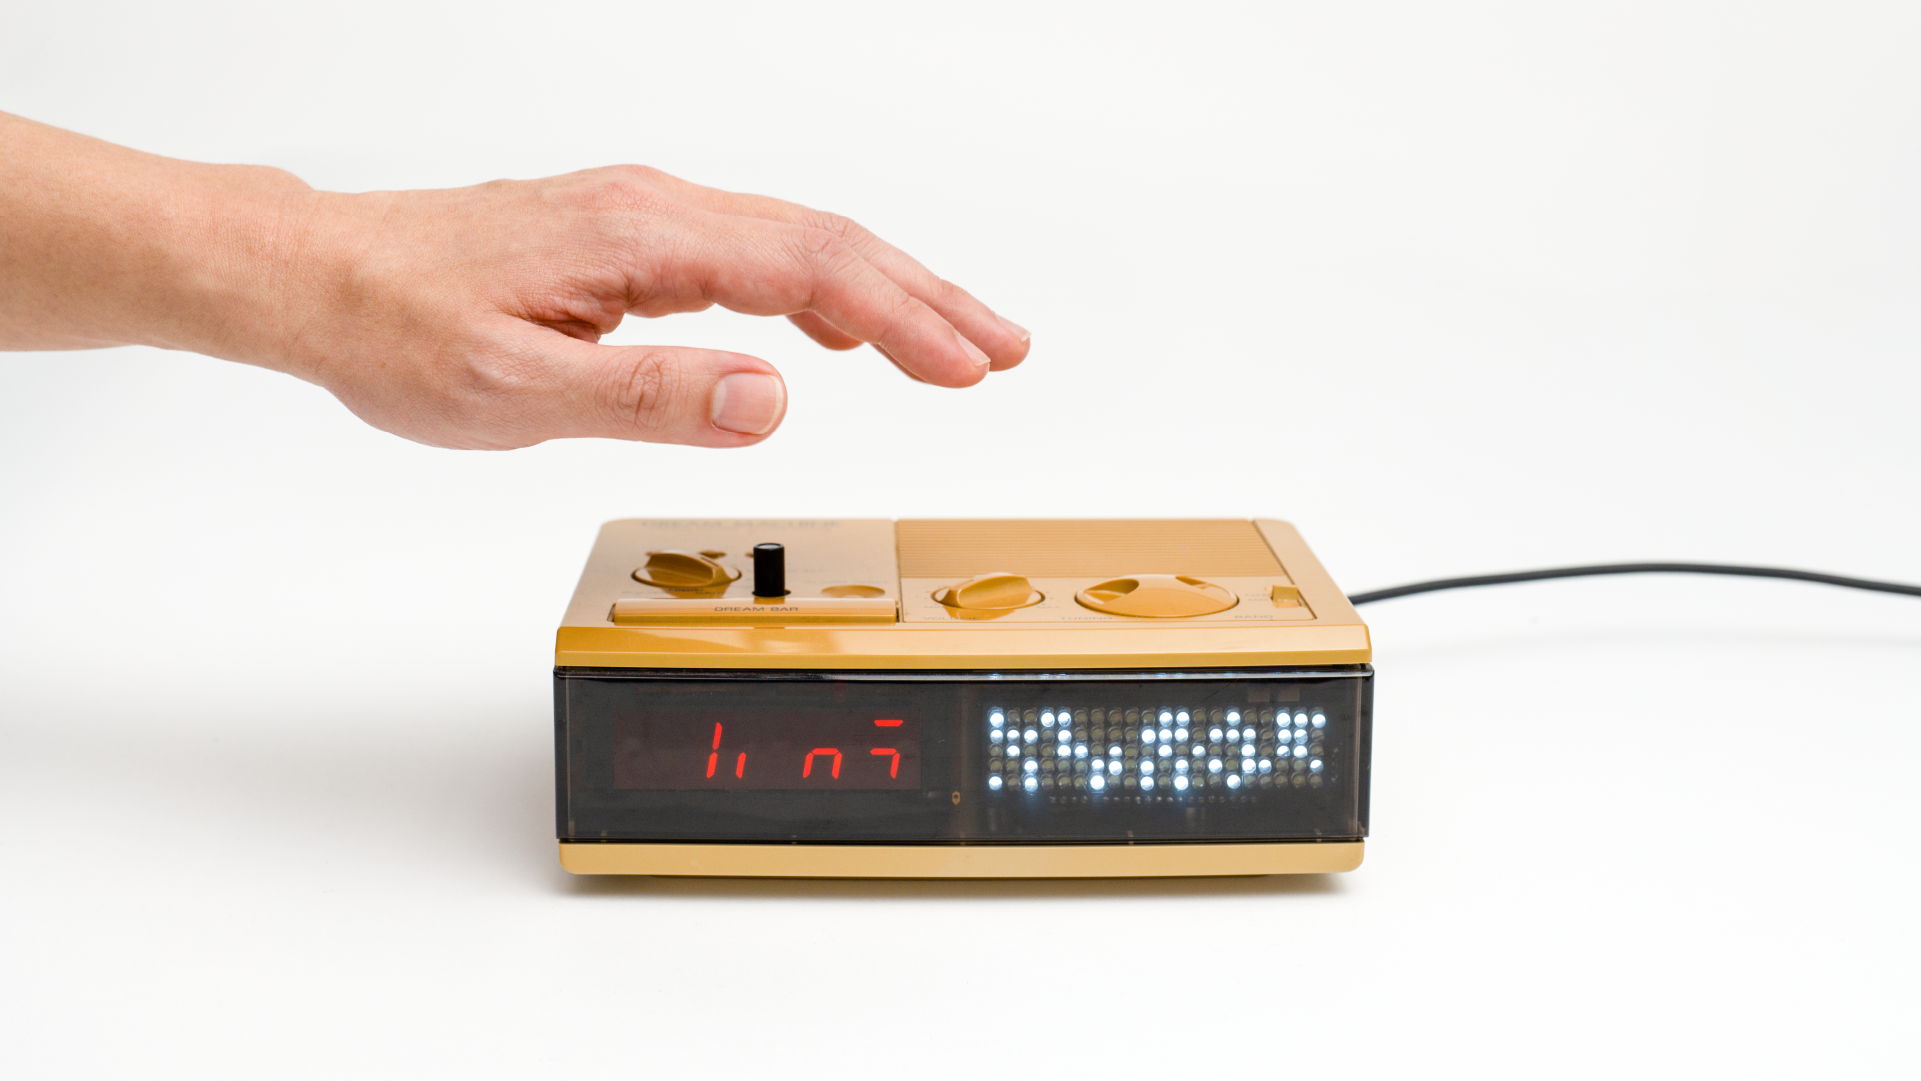 Justin and Sheere’s Clock Radio - repaired, part of R for Repair 2021. Imagery by KHOOGJ